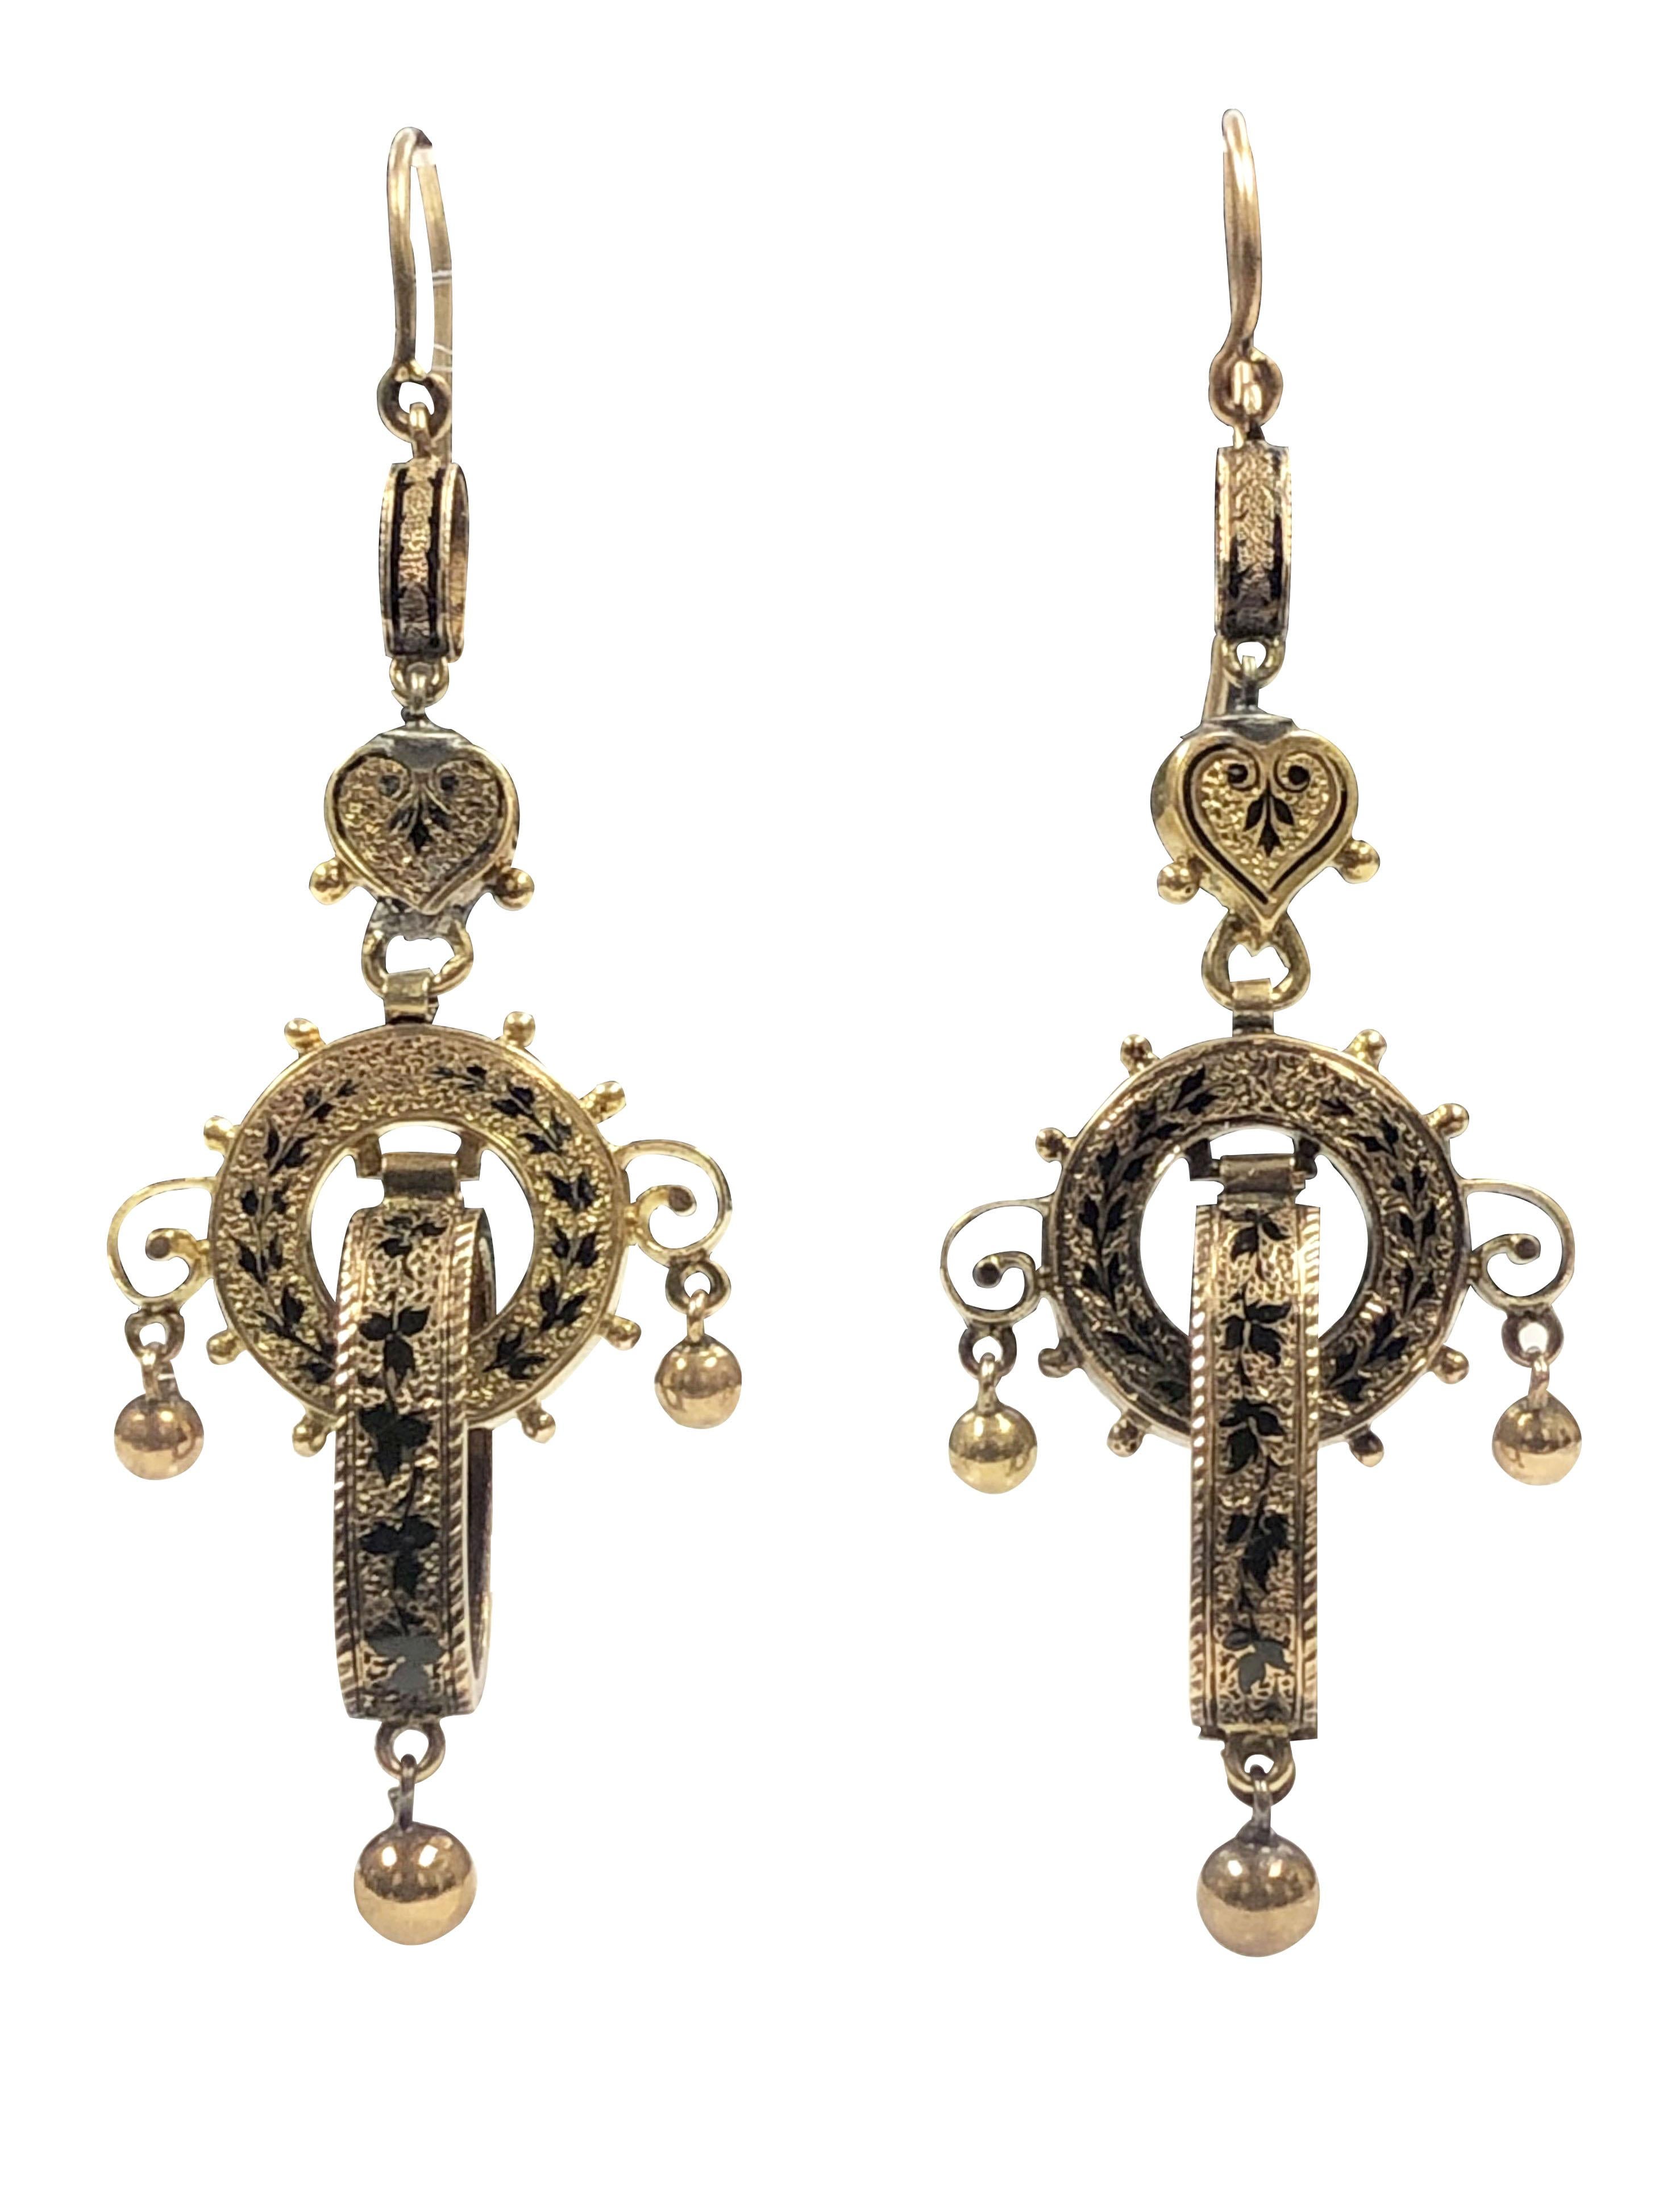 Circa 1870 High Style Victorian 14K Yellow Gold Dangle Earrings, measuring 2 1/2 inches in Length and 7/8 inch wide. comprised of several individual sections each are articulated with lots of movement. Finished with Black Enamel and in near